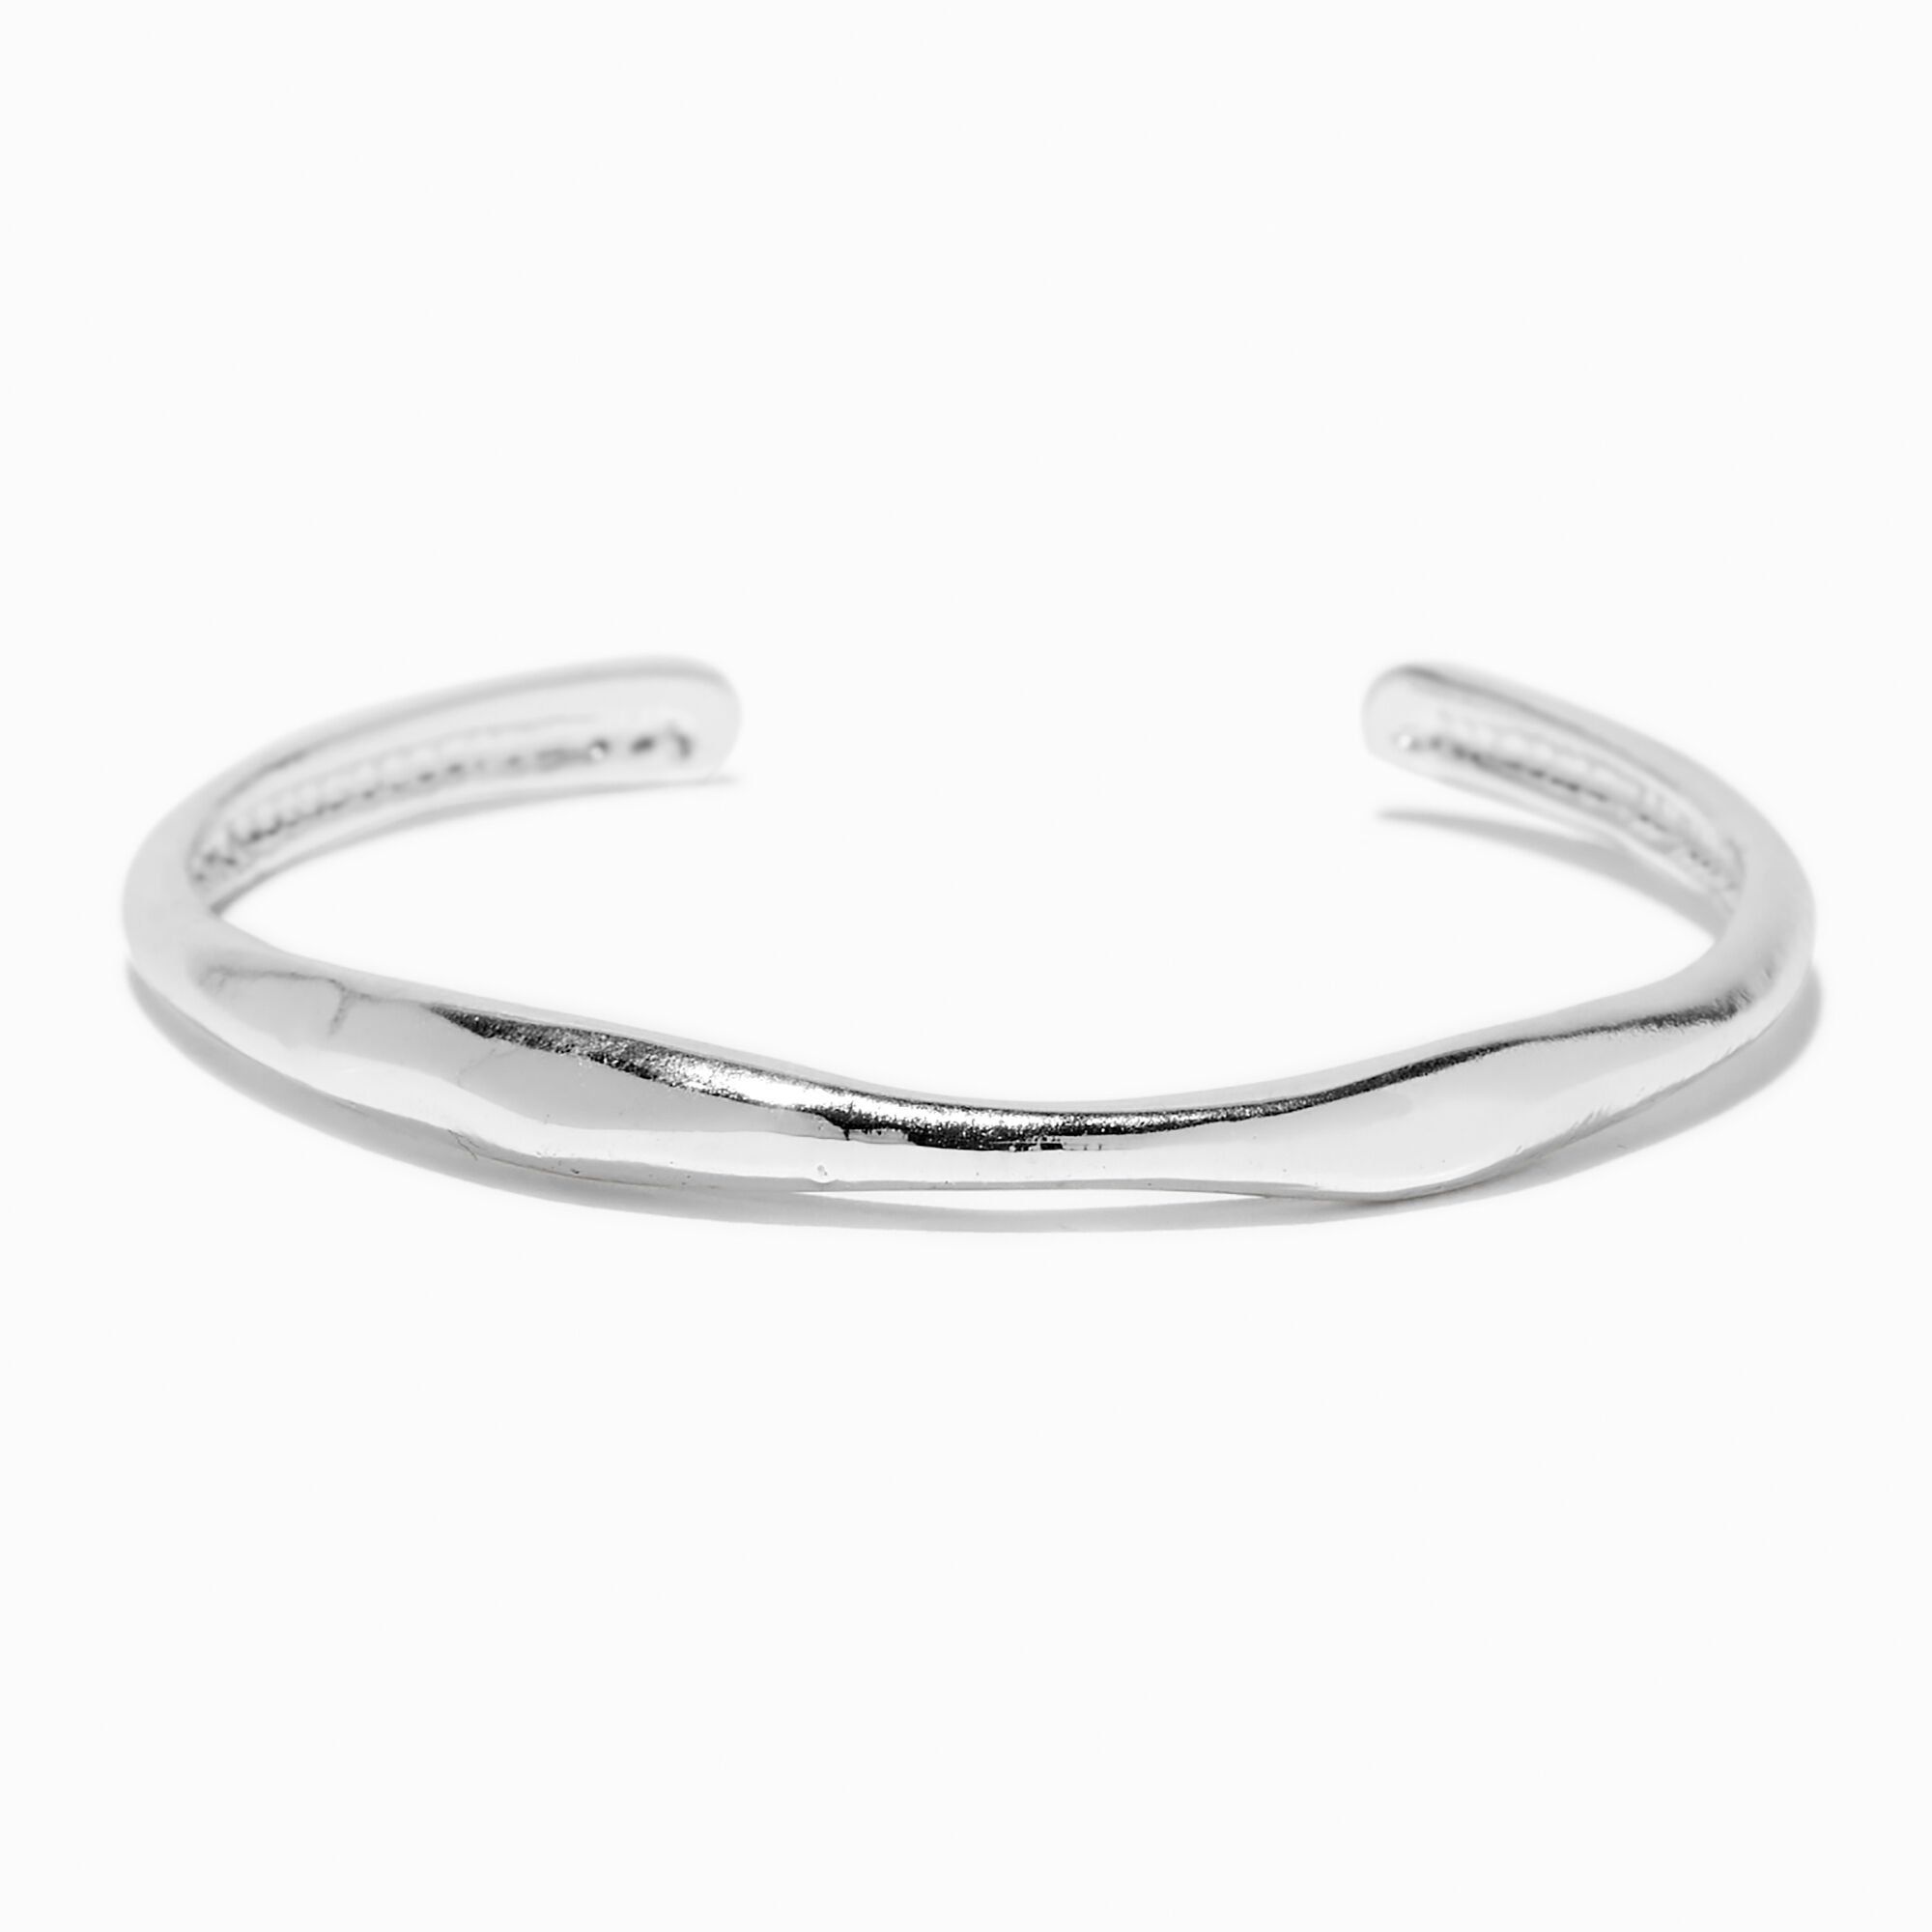 View Claires Tone Wavy Cuff Bracelet Silver information